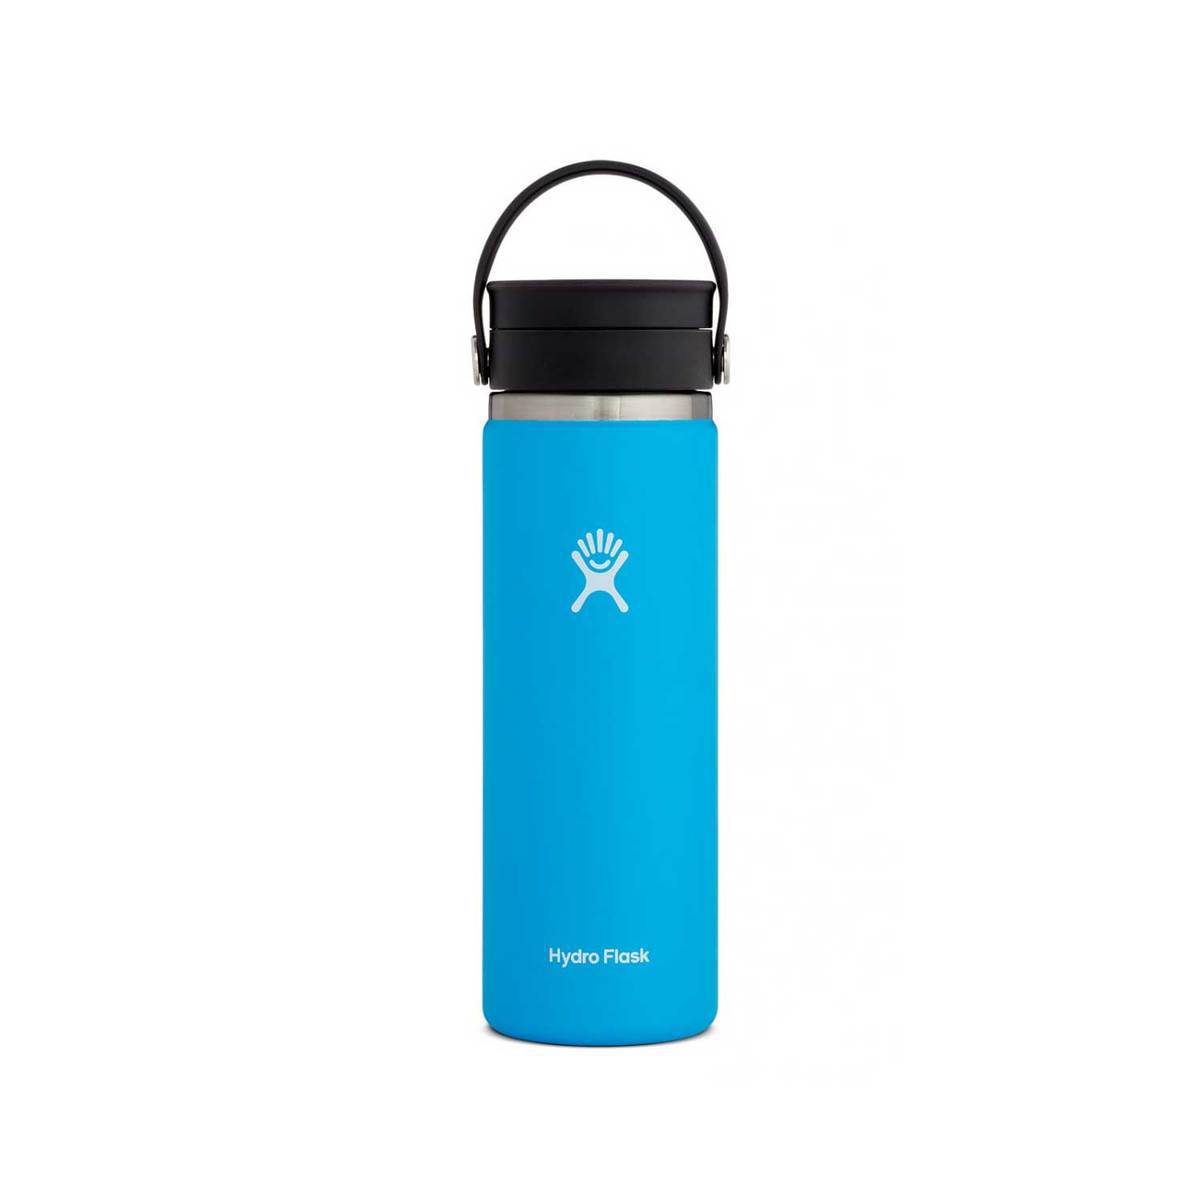 Hydro Flask 20 oz. Wide-Mouth Insulated Water Bottle with Sport Cap